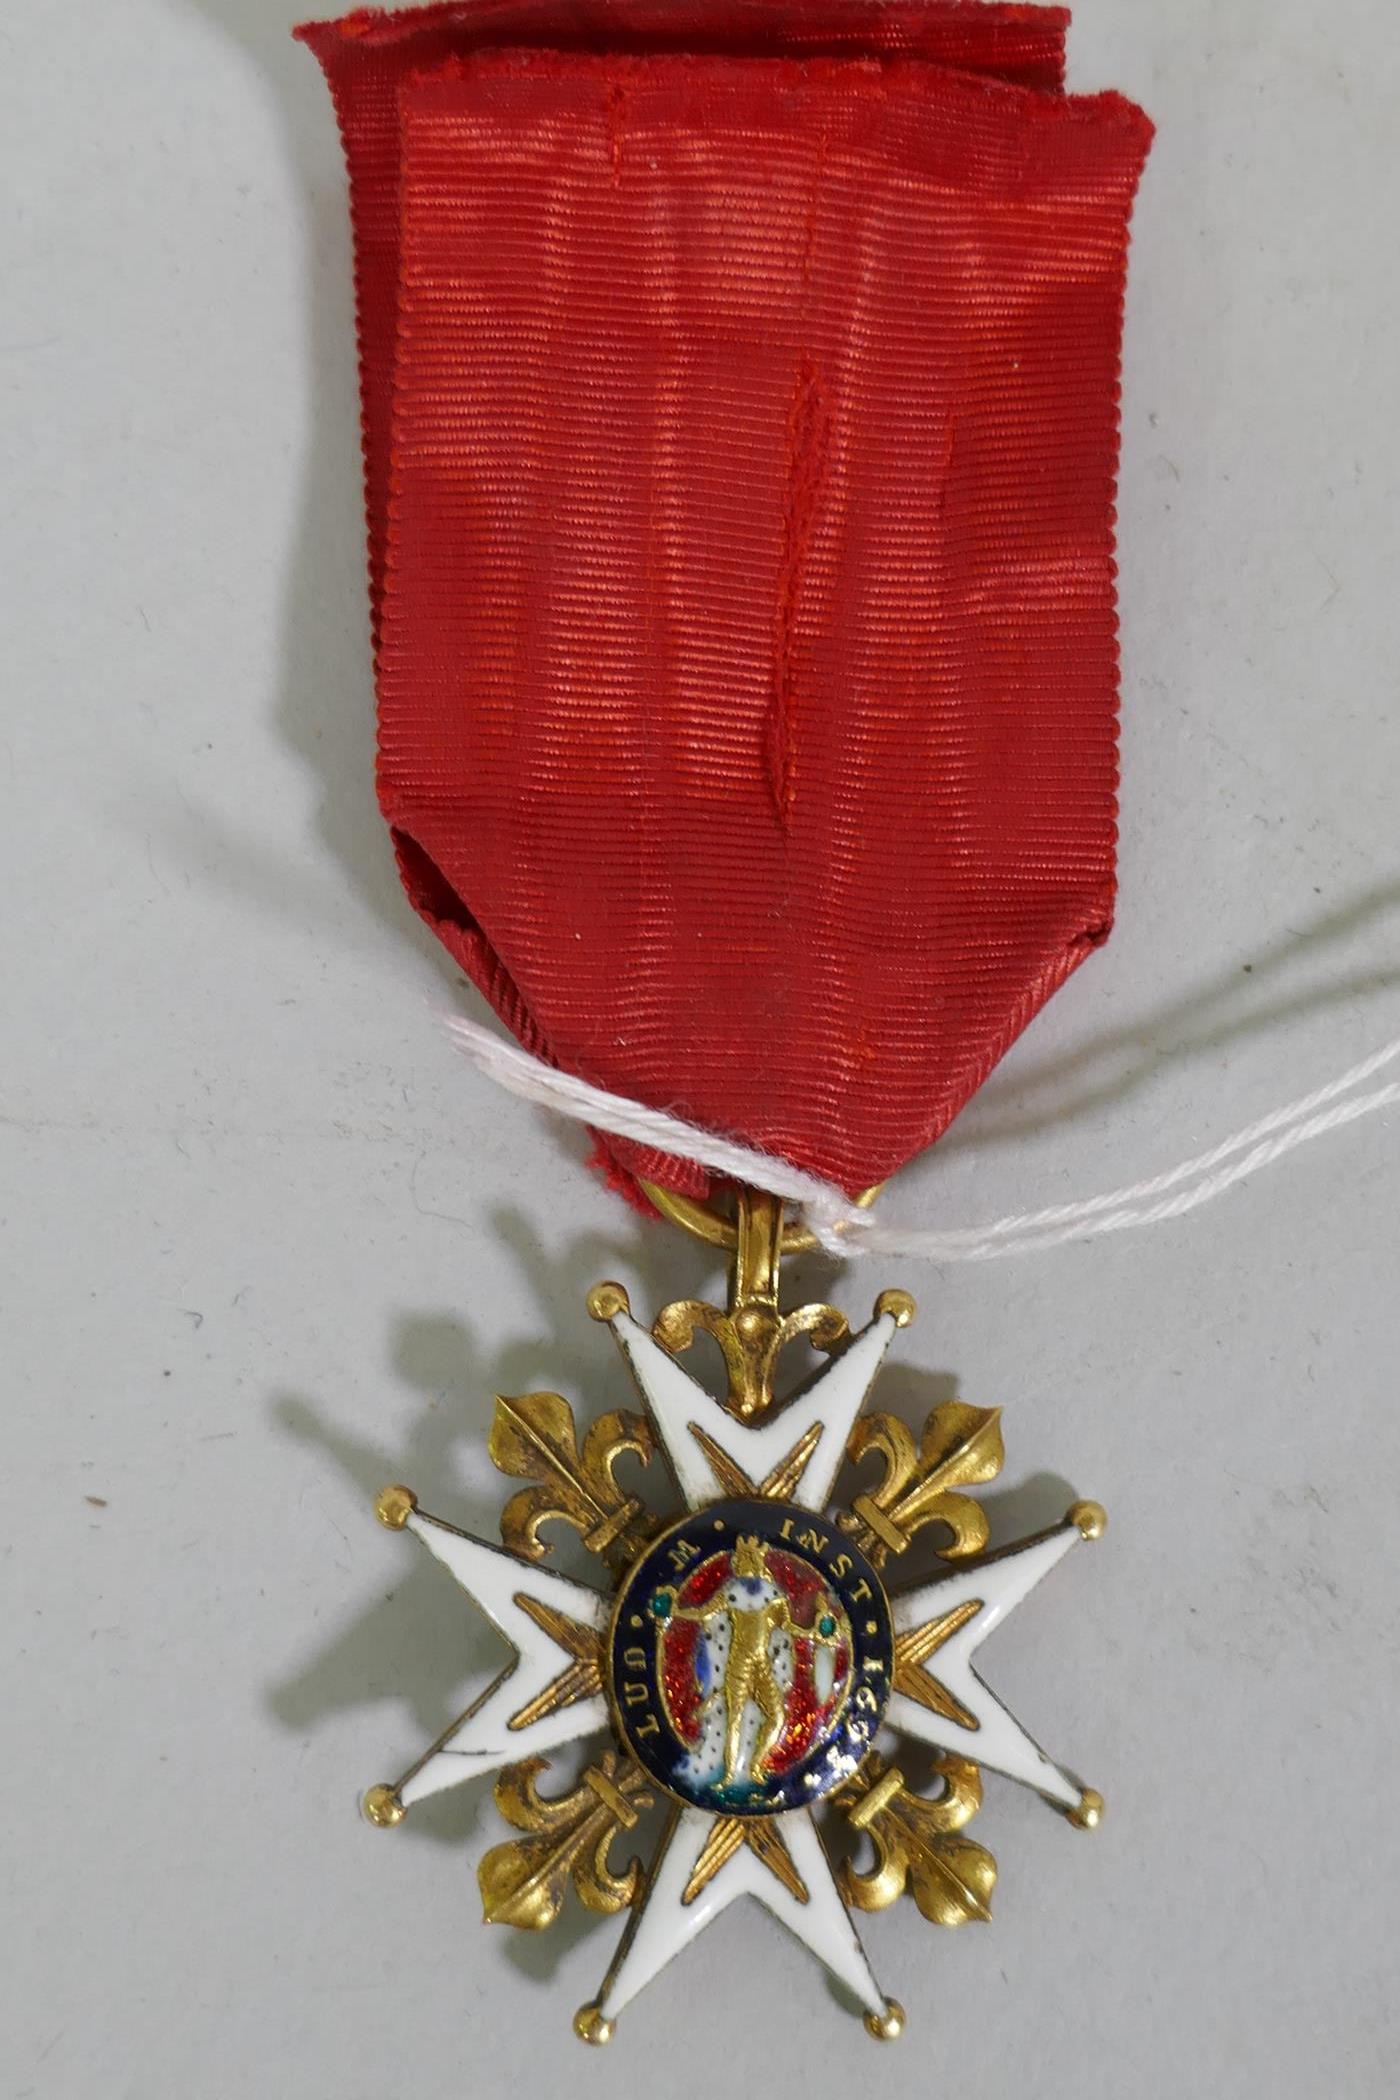 A French military medal, Ordre de Saint Louis, in gold and enamels, 37mm, 16.2g gross, with red silk